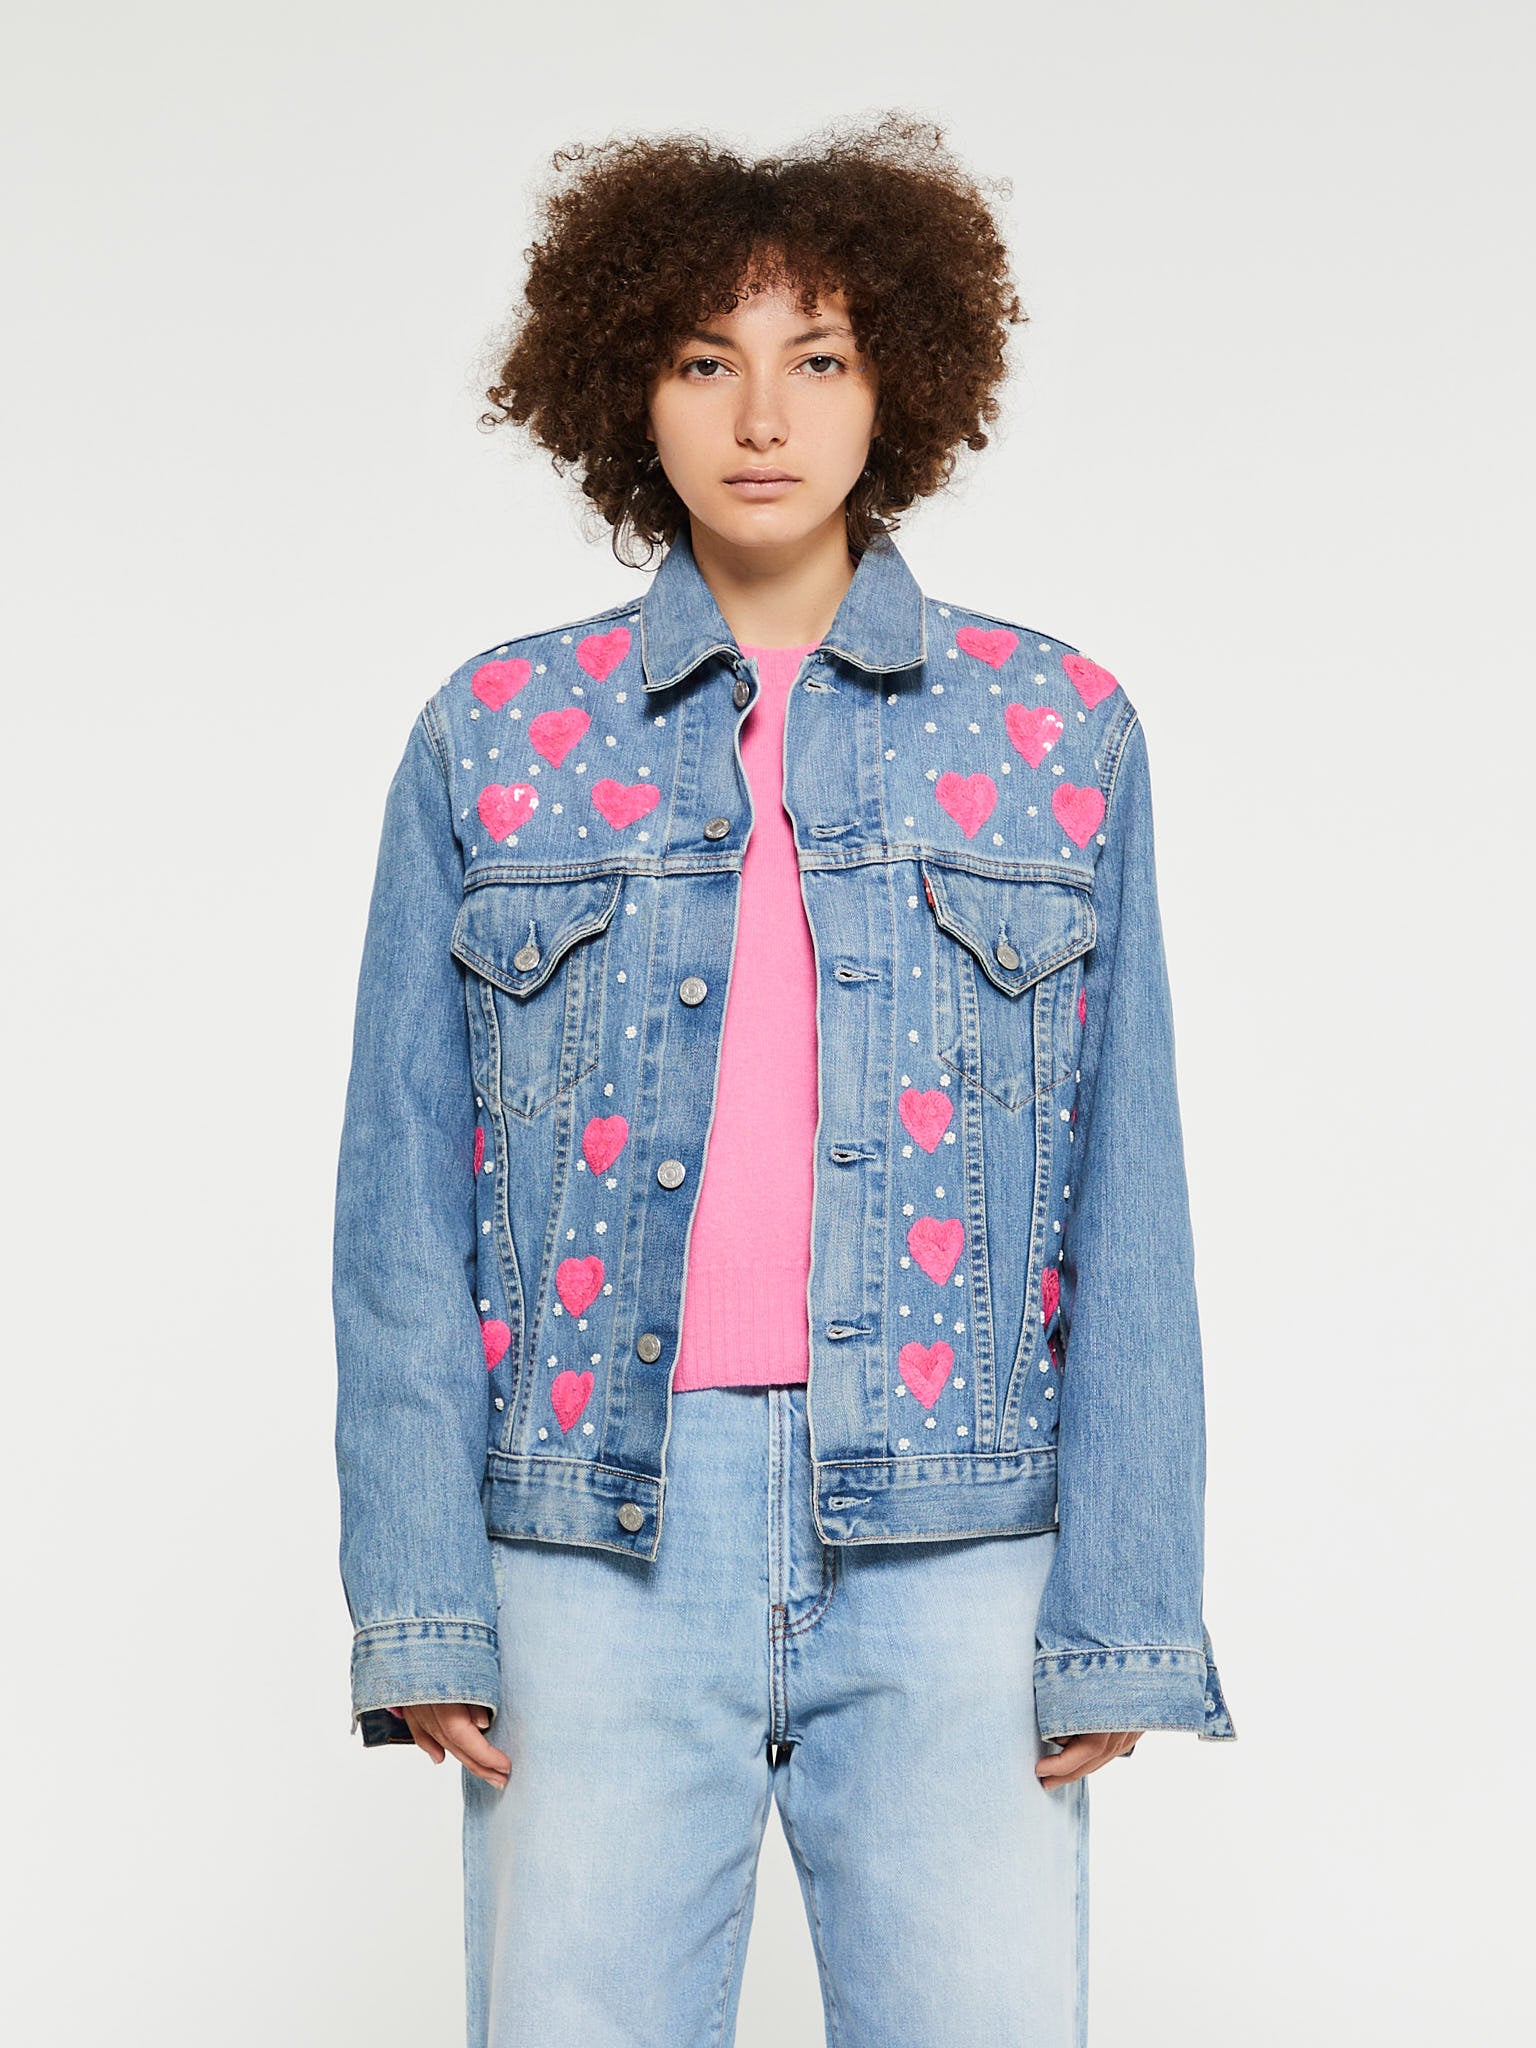 Upcycled Denim Jacket With Beaded Pink Hearts